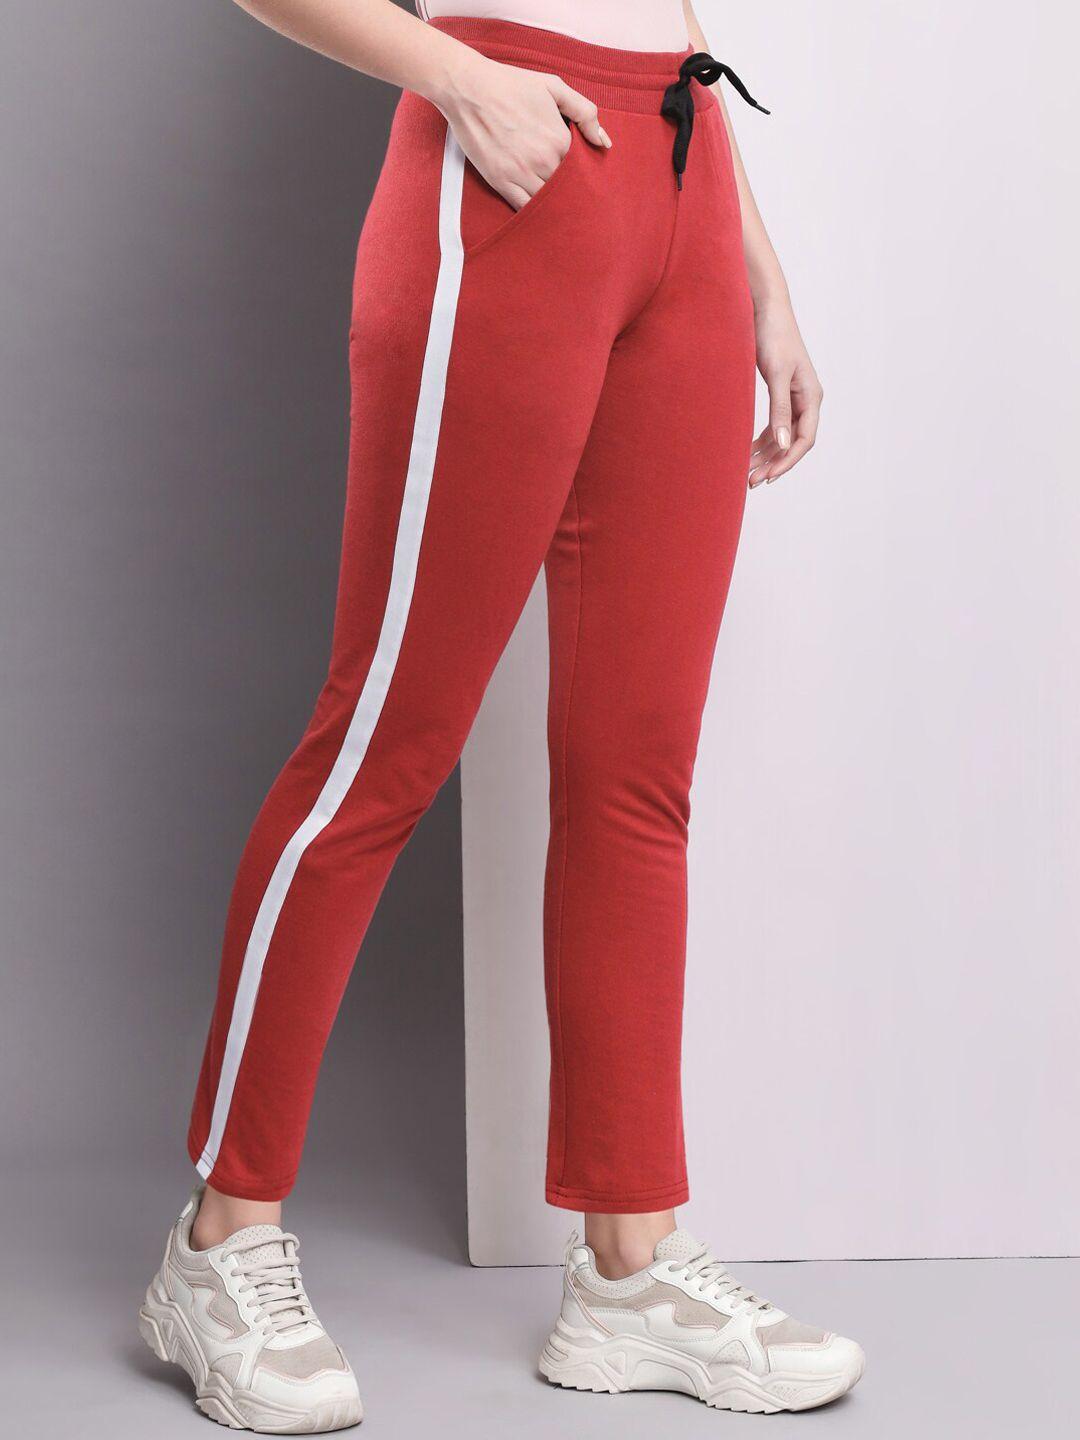 q-rious women pure cotton side striped training track pants